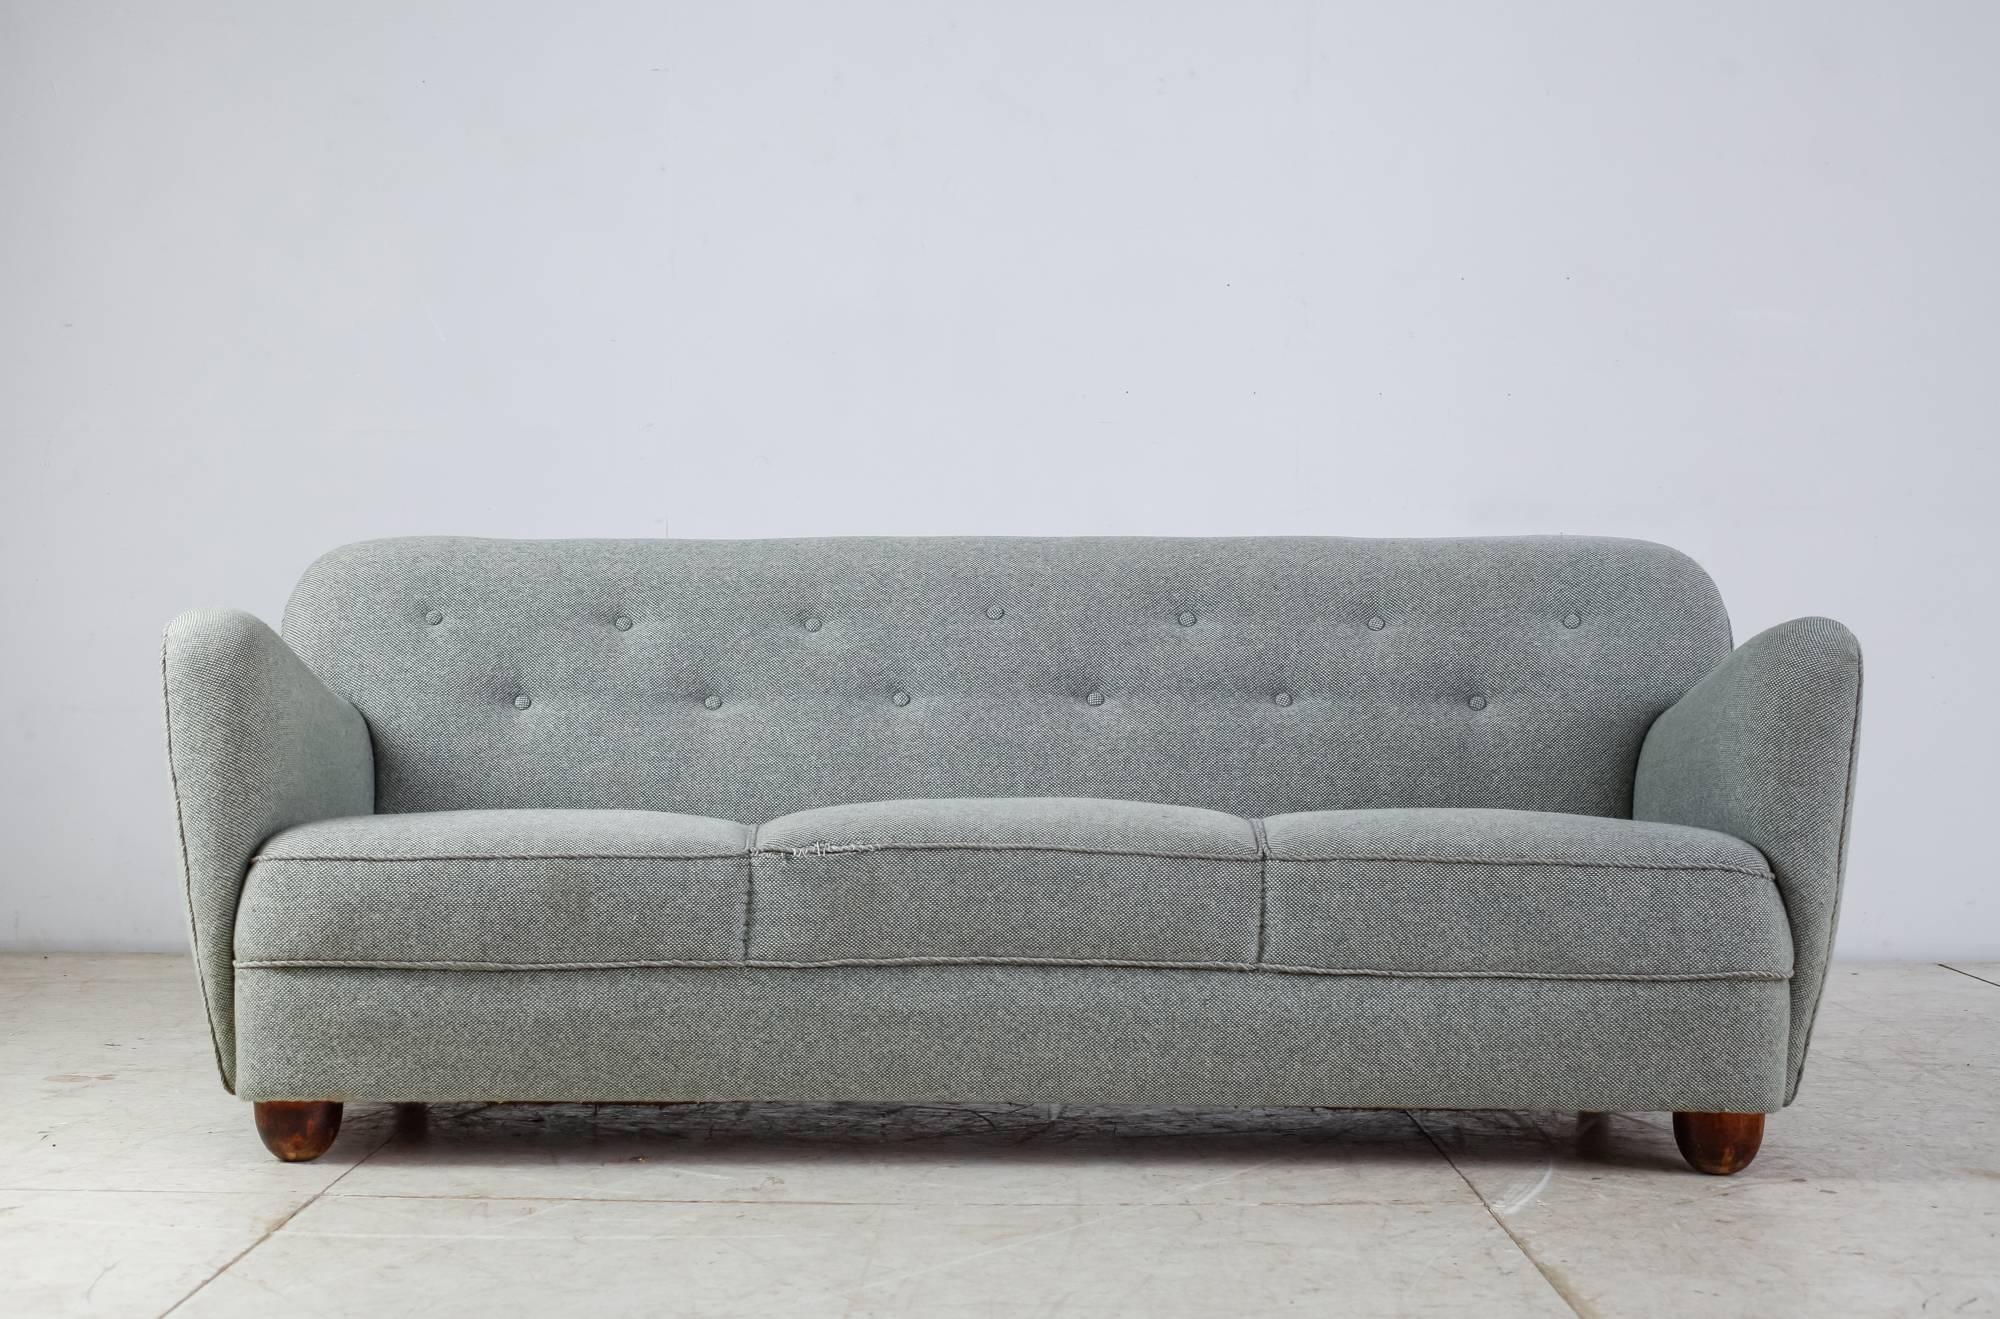 A slightly curved, three-seat sofa, standing on oak legs, round in the front and rectangular in the back. The sofa has a light blue fabric upholstery with a buttoned backrest.
Structurally the sofa is in an excellent condition, but the fabric shows